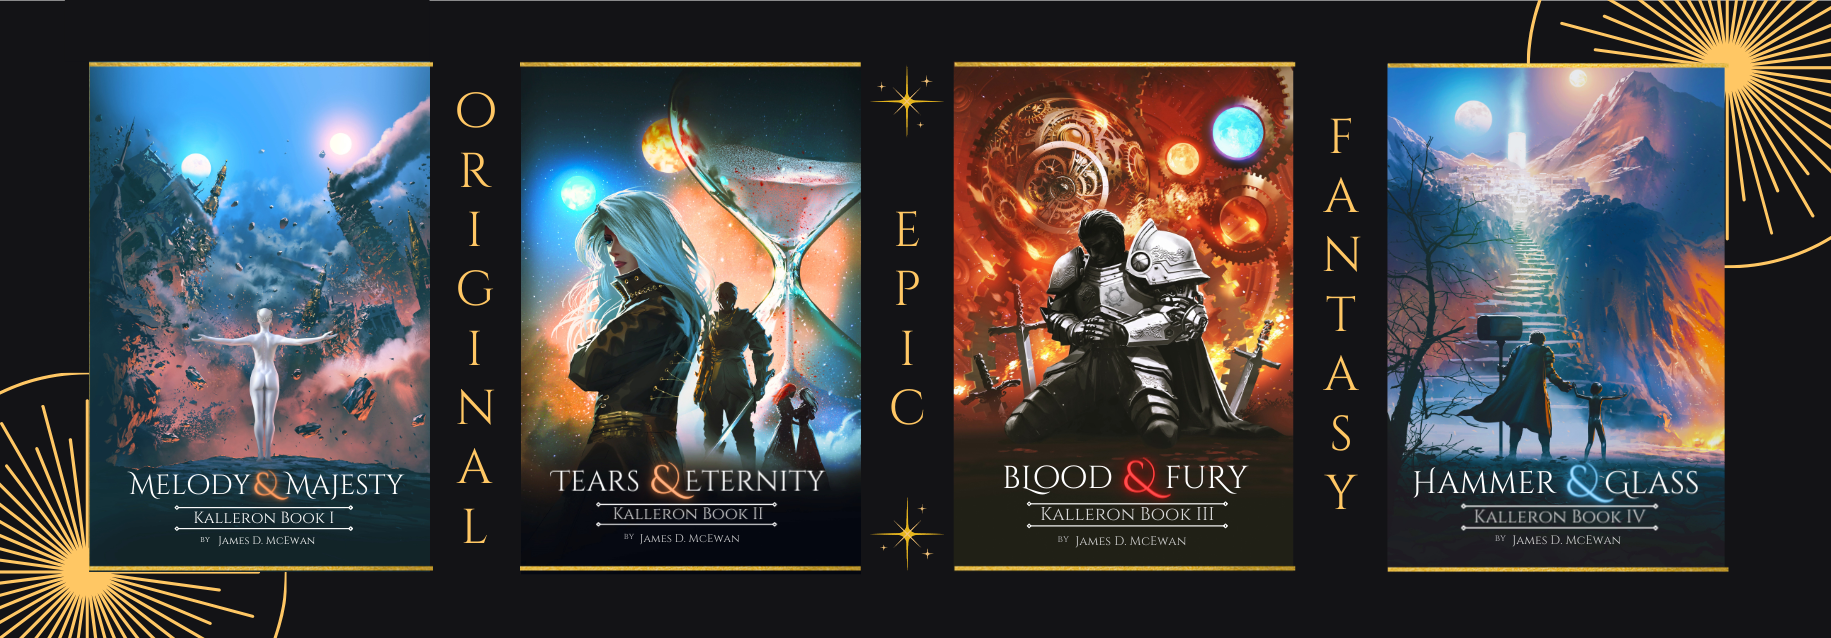 Image of four epic fantasy book covers by James D. McEwan